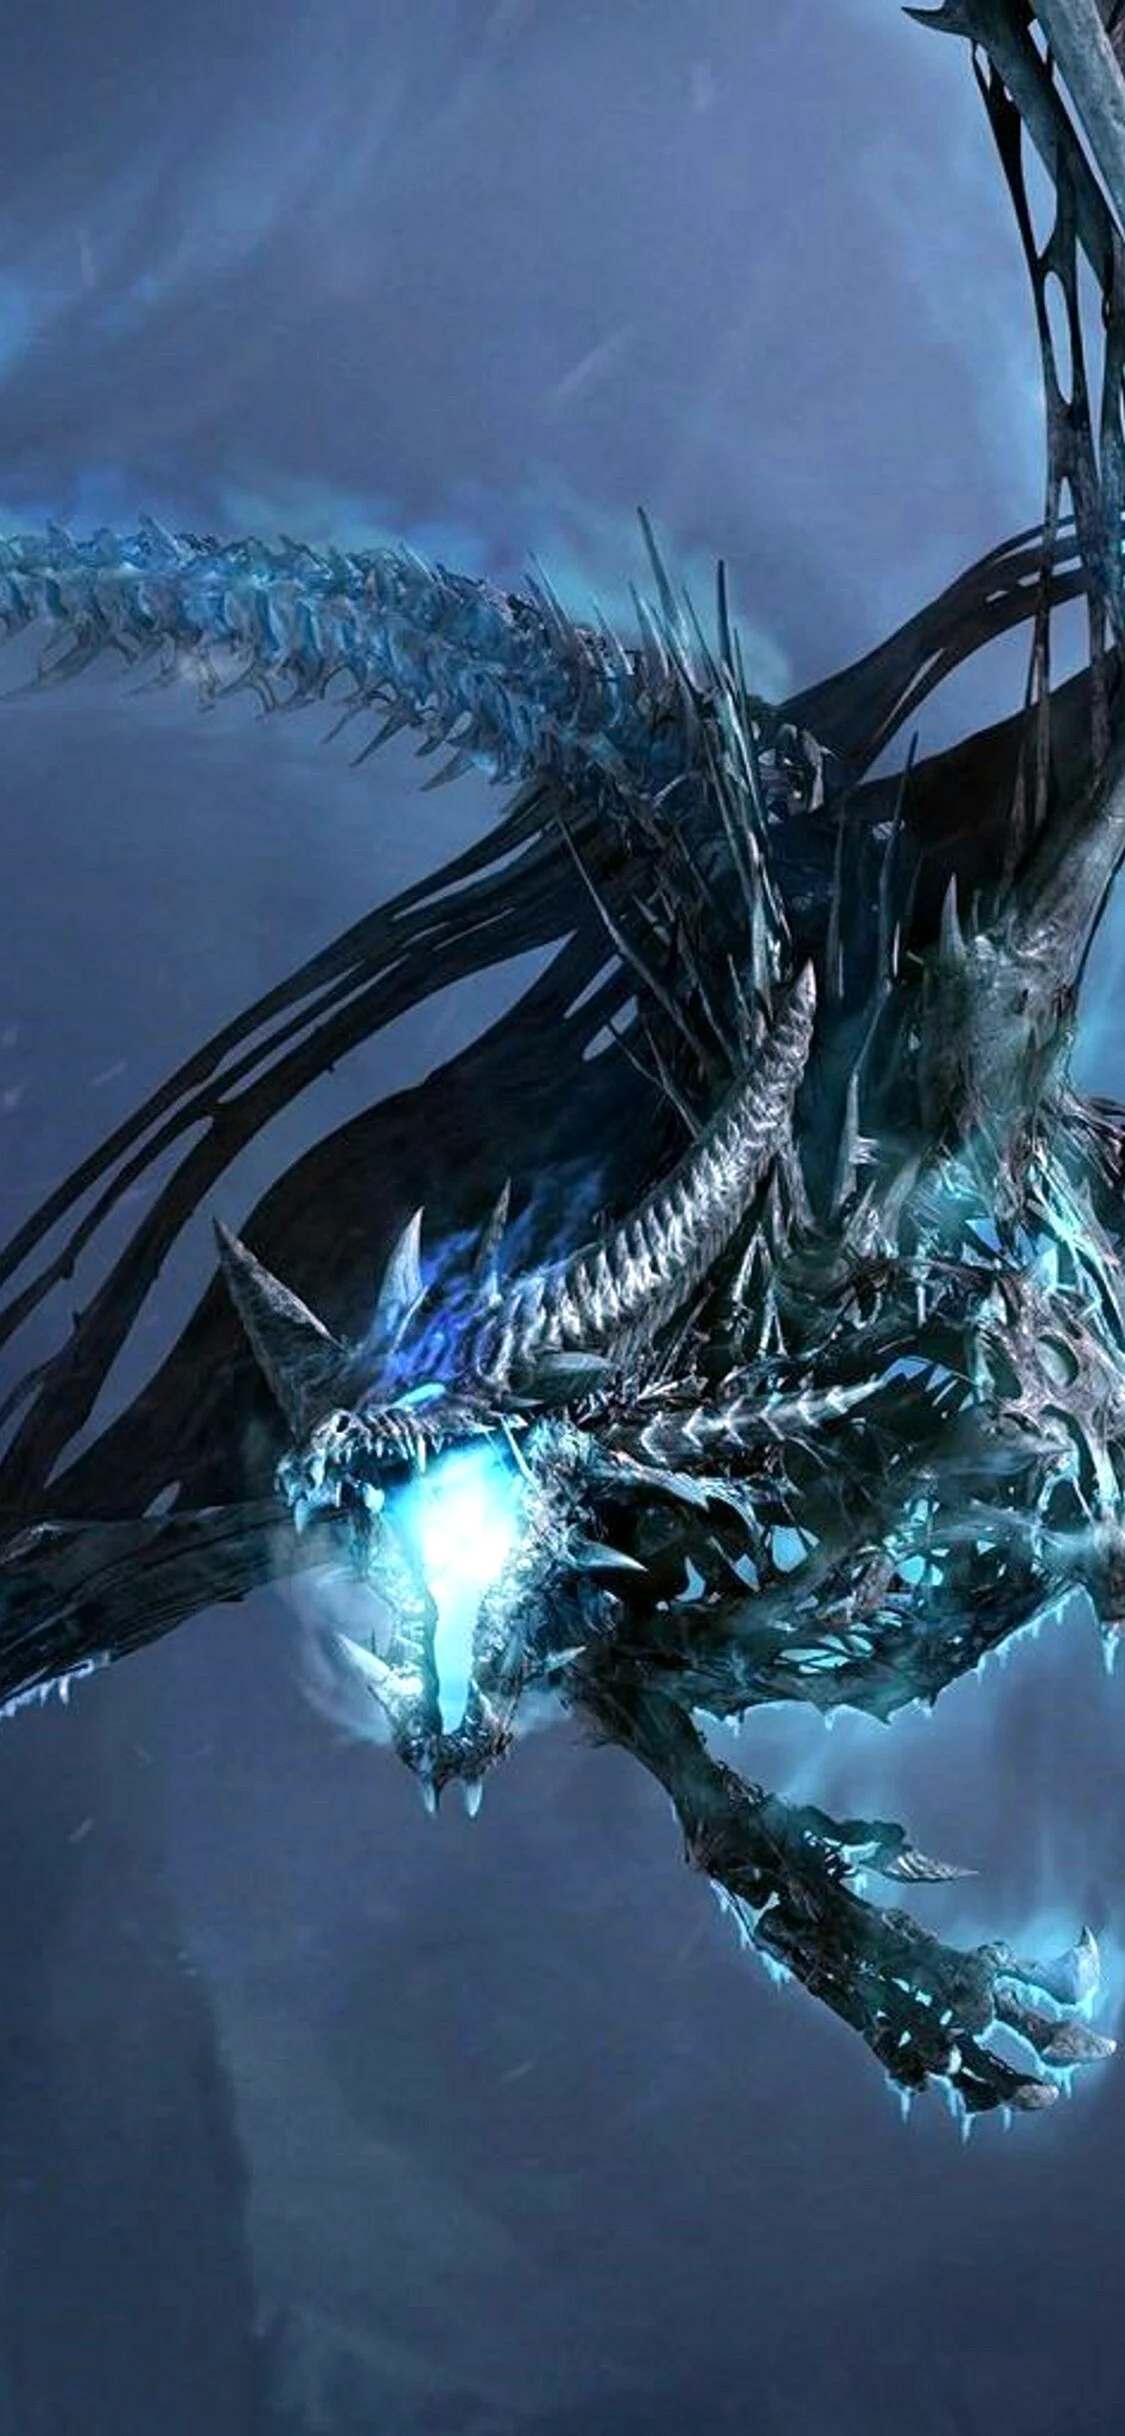 Lich King Dragon Wallpaper for iPhone 11 Pro